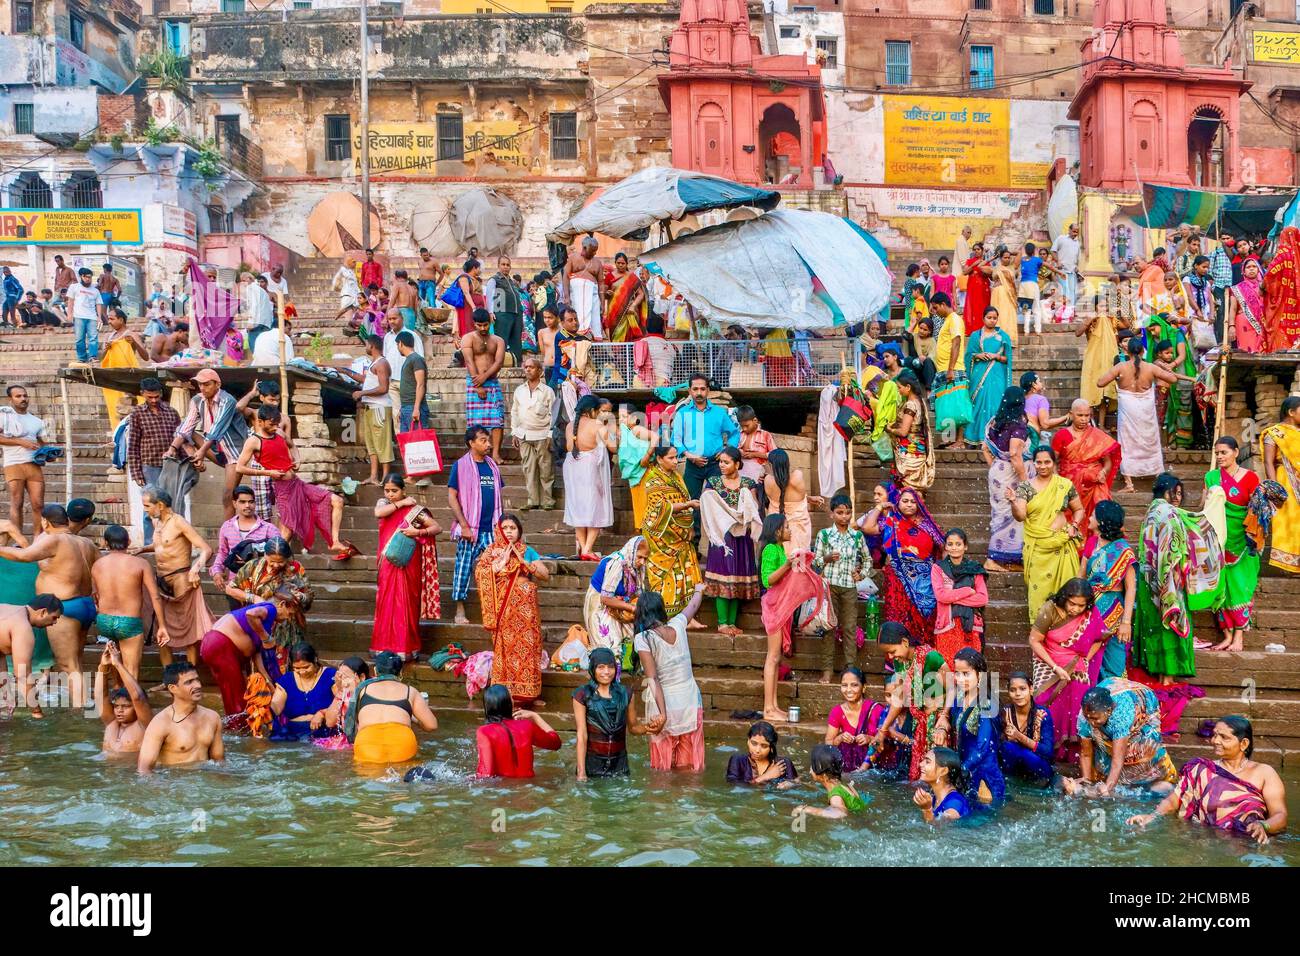 Varanasi, India - November 11, 2015. Indian religious pilgrims standing on a ghat and bathing in the Ganges River, an important ritual in Hinduism. Stock Photo